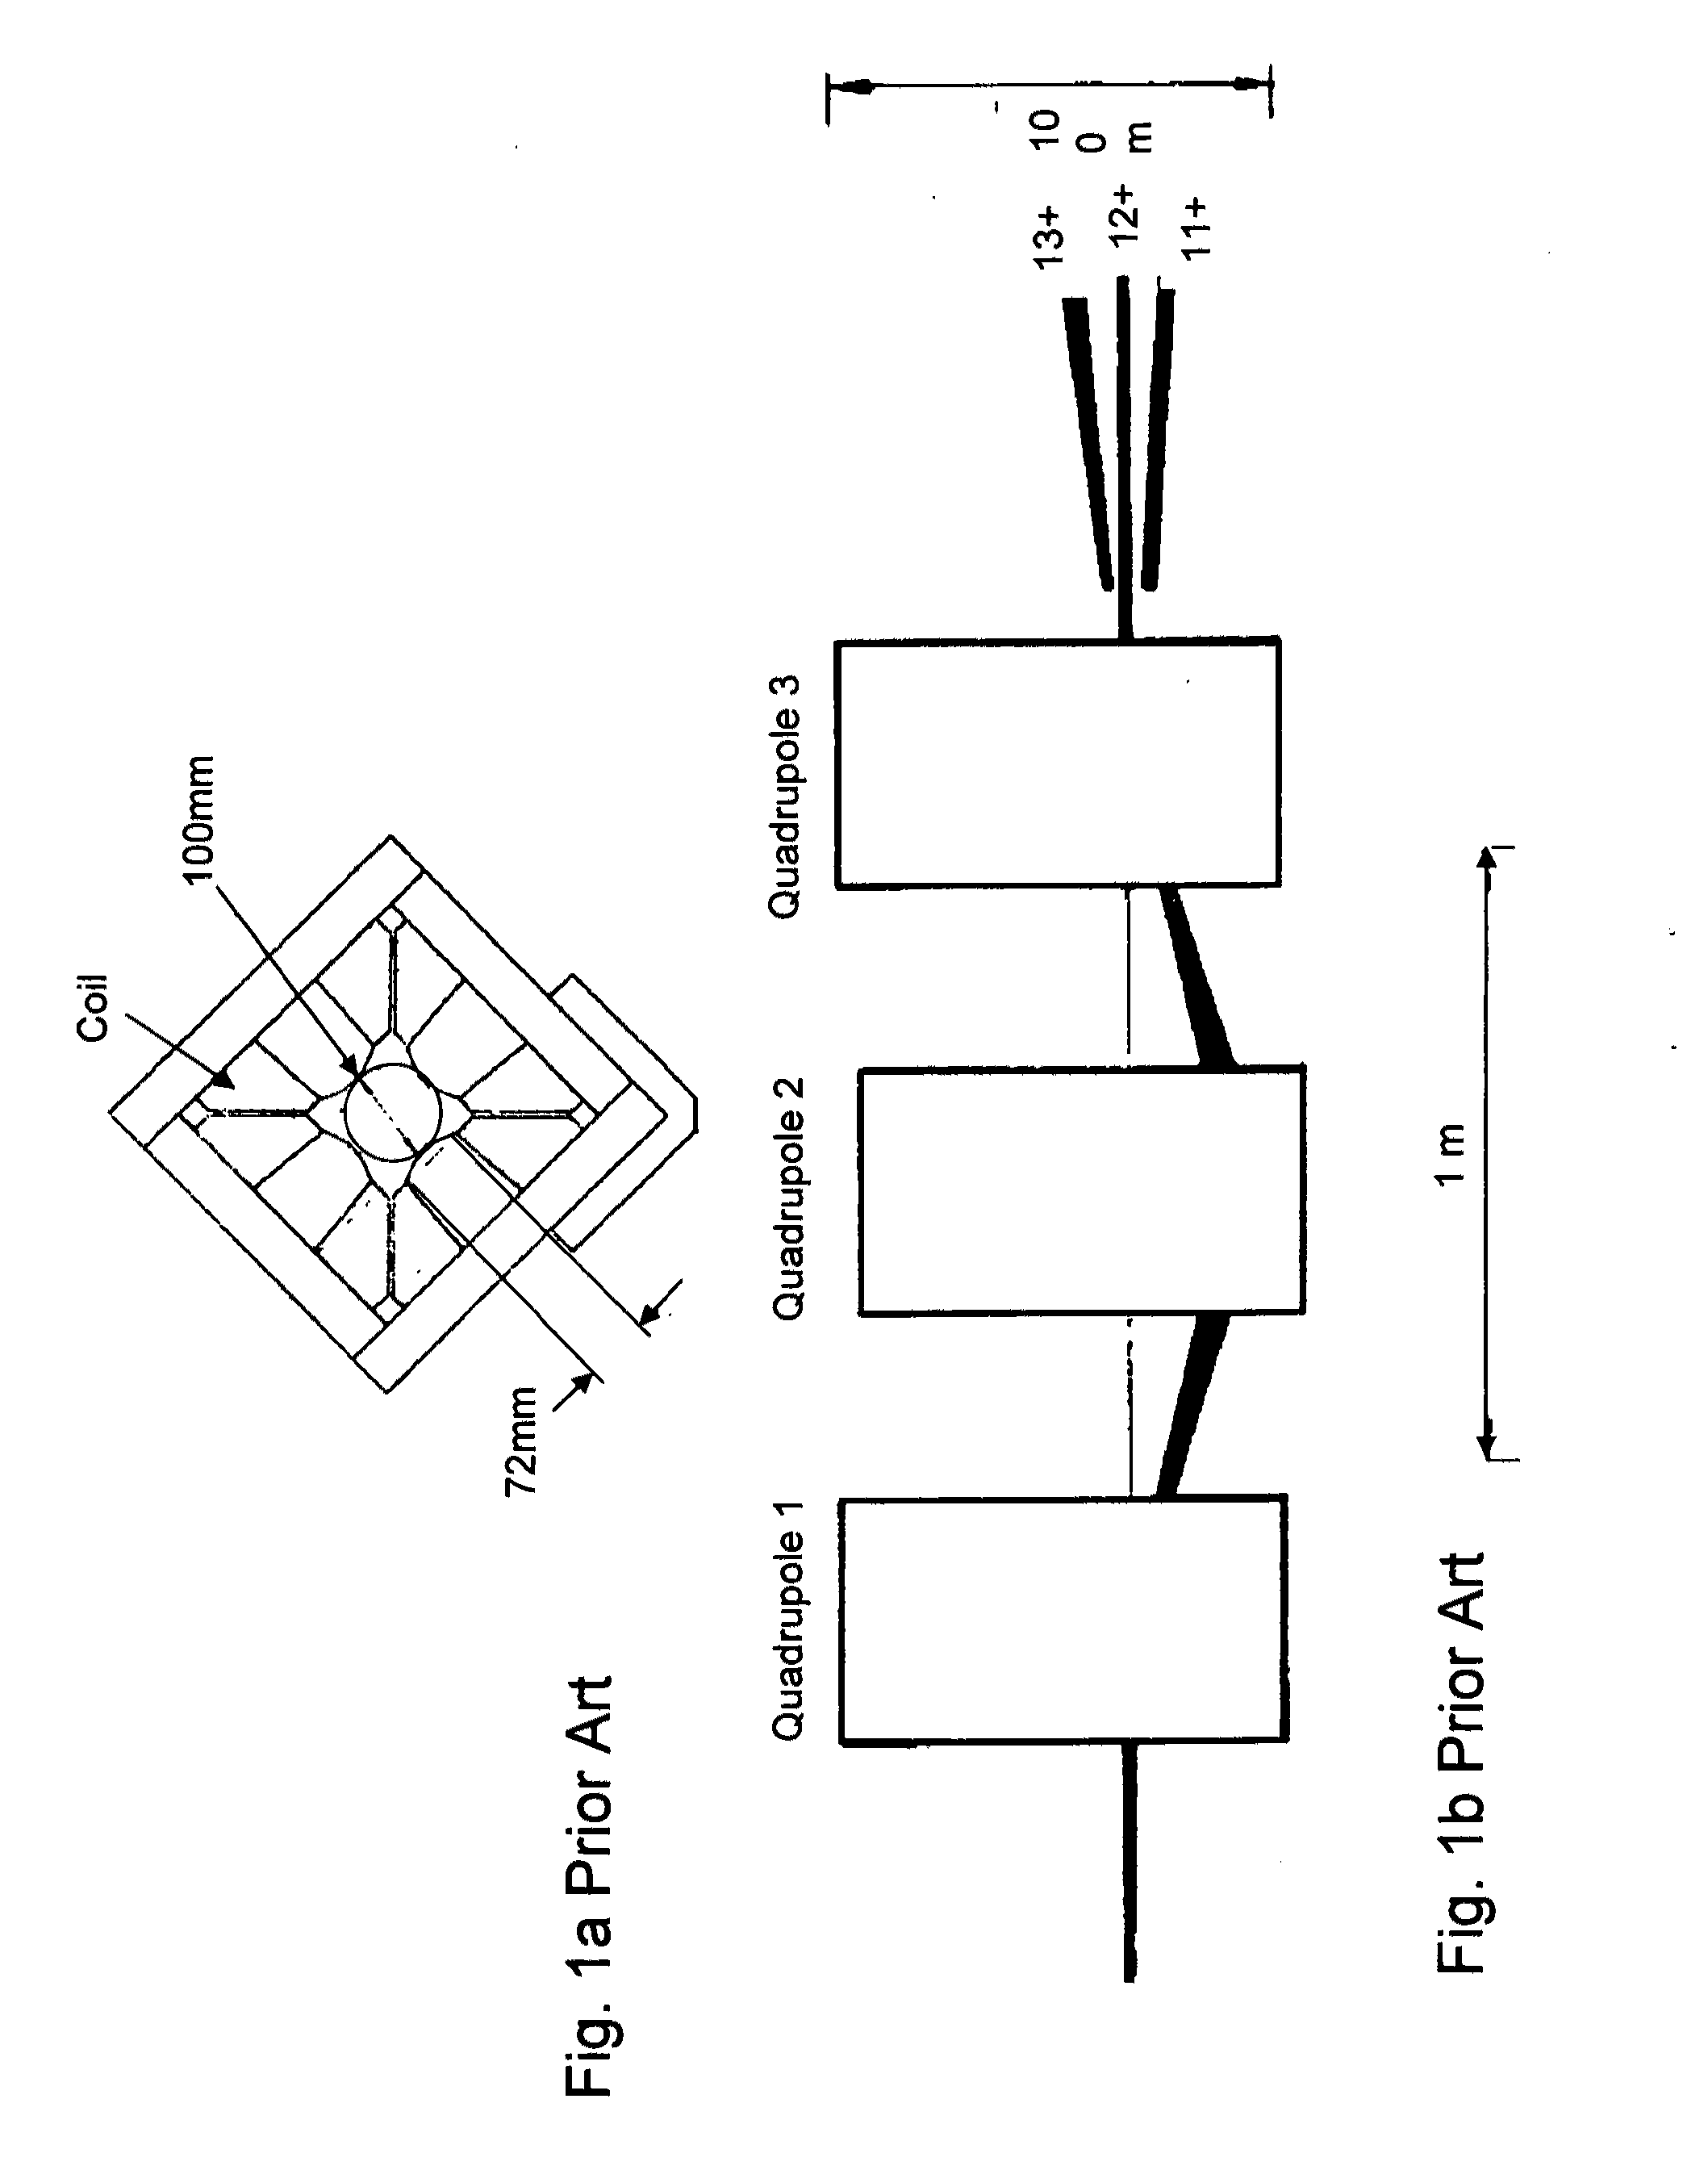 Mass analyzer apparatus and systems operative for focusing ribbon ion beams and for separating desired ion species from unwanted ion species in ribbon ion beams